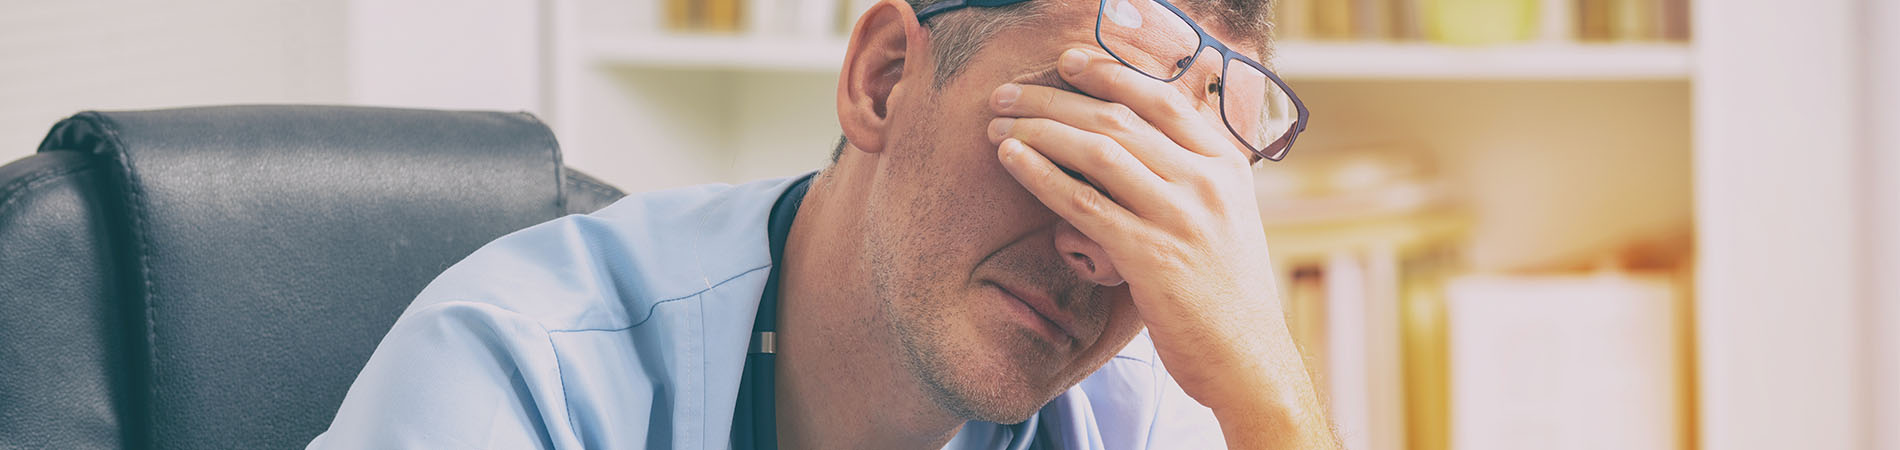 A provider showing signs of physician burnout with visible signs of exasperation